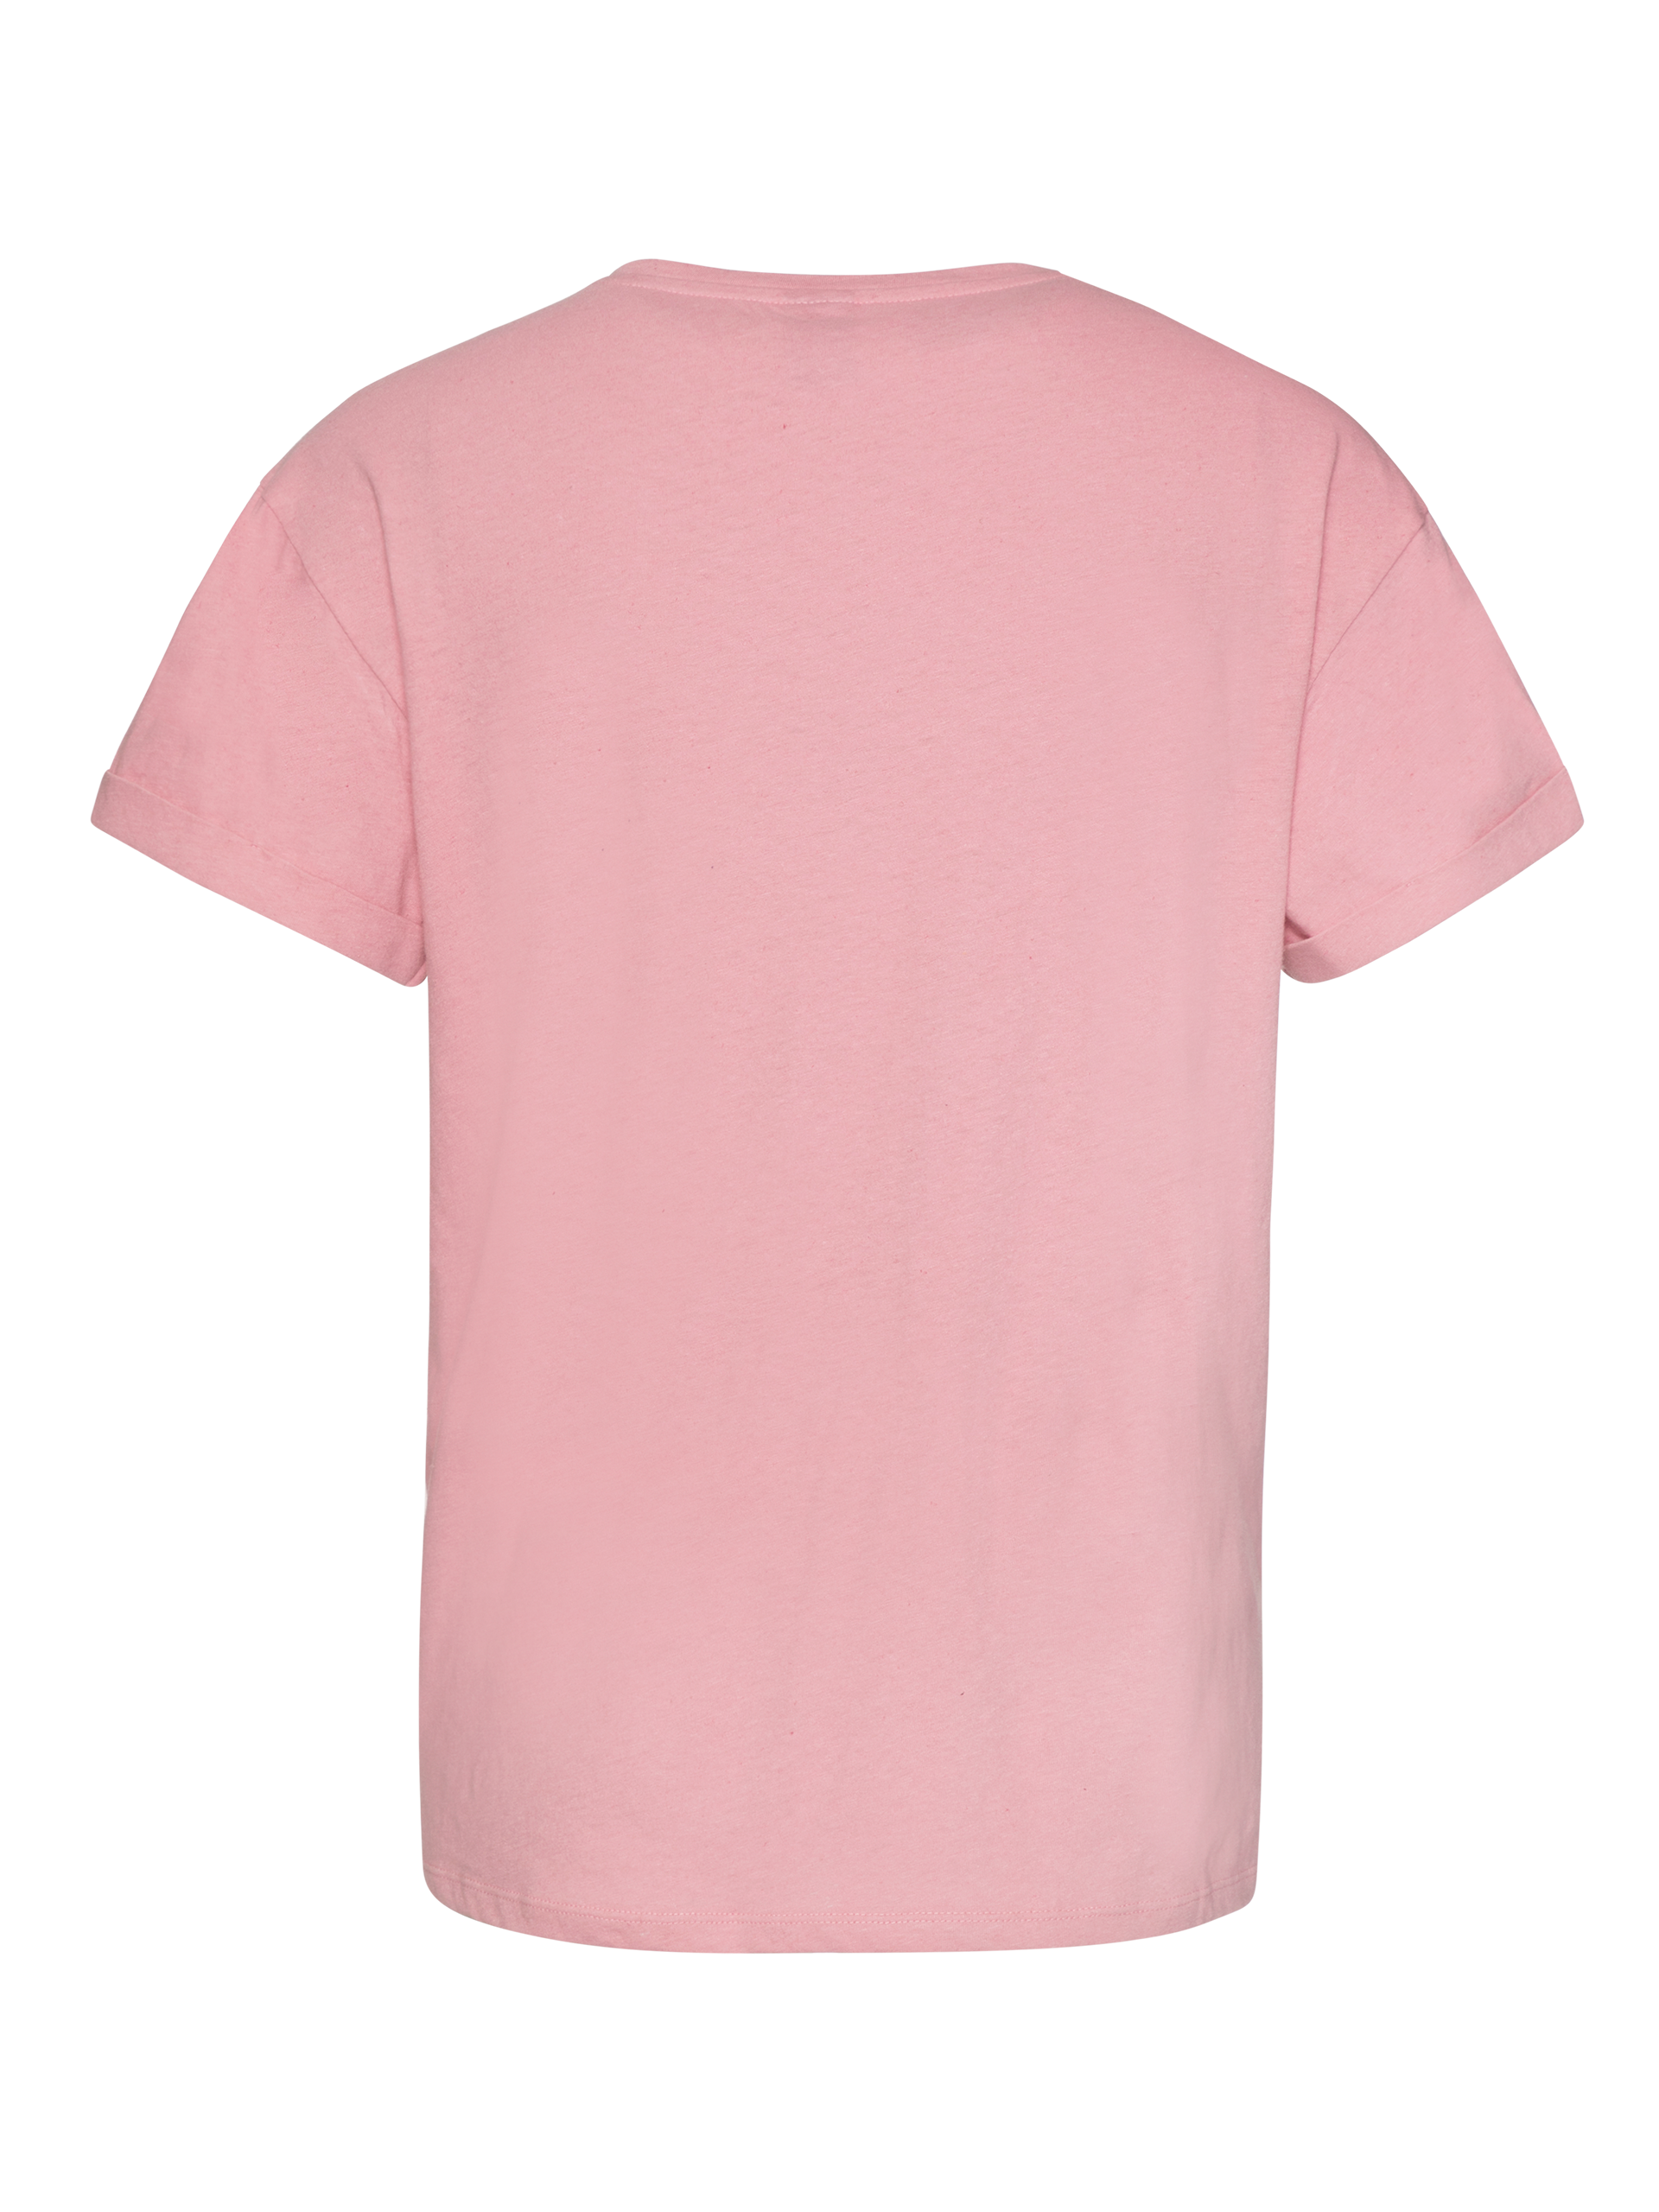 pink t shirt plain front and back